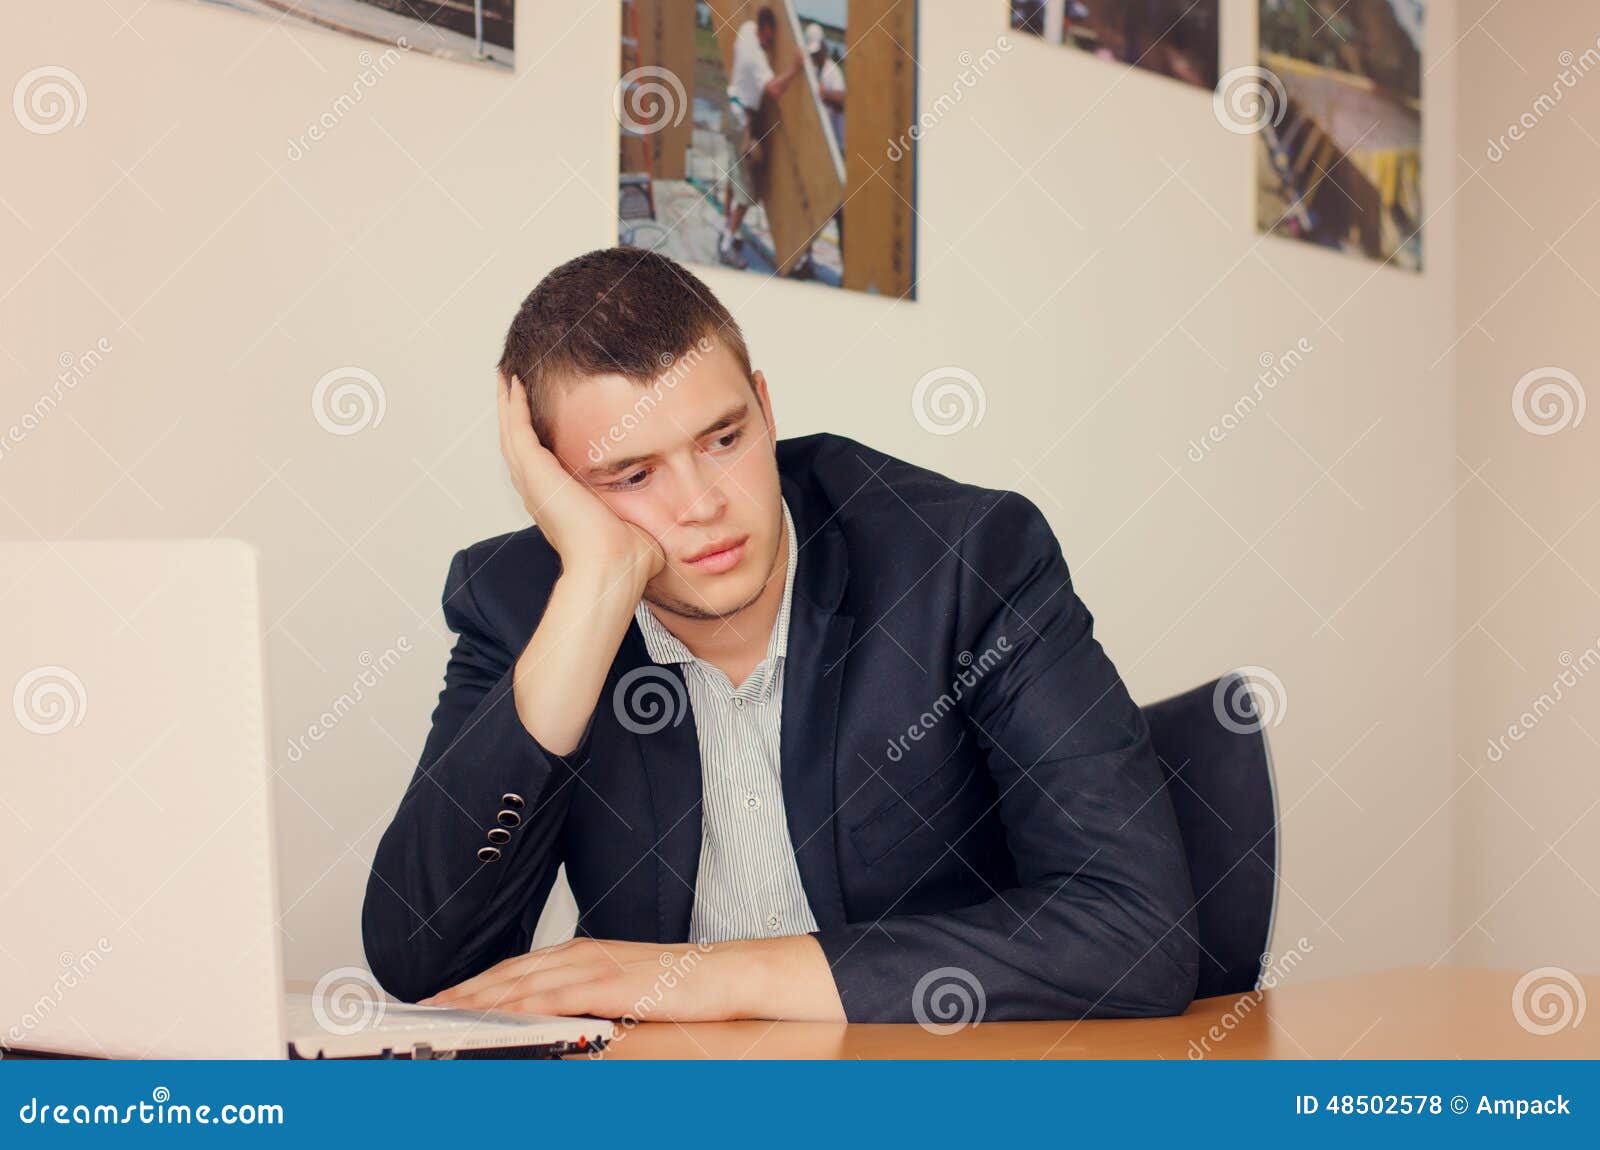 businessman-laptop-resting-head-hand-young-office-looking-bored-48502578.jpg